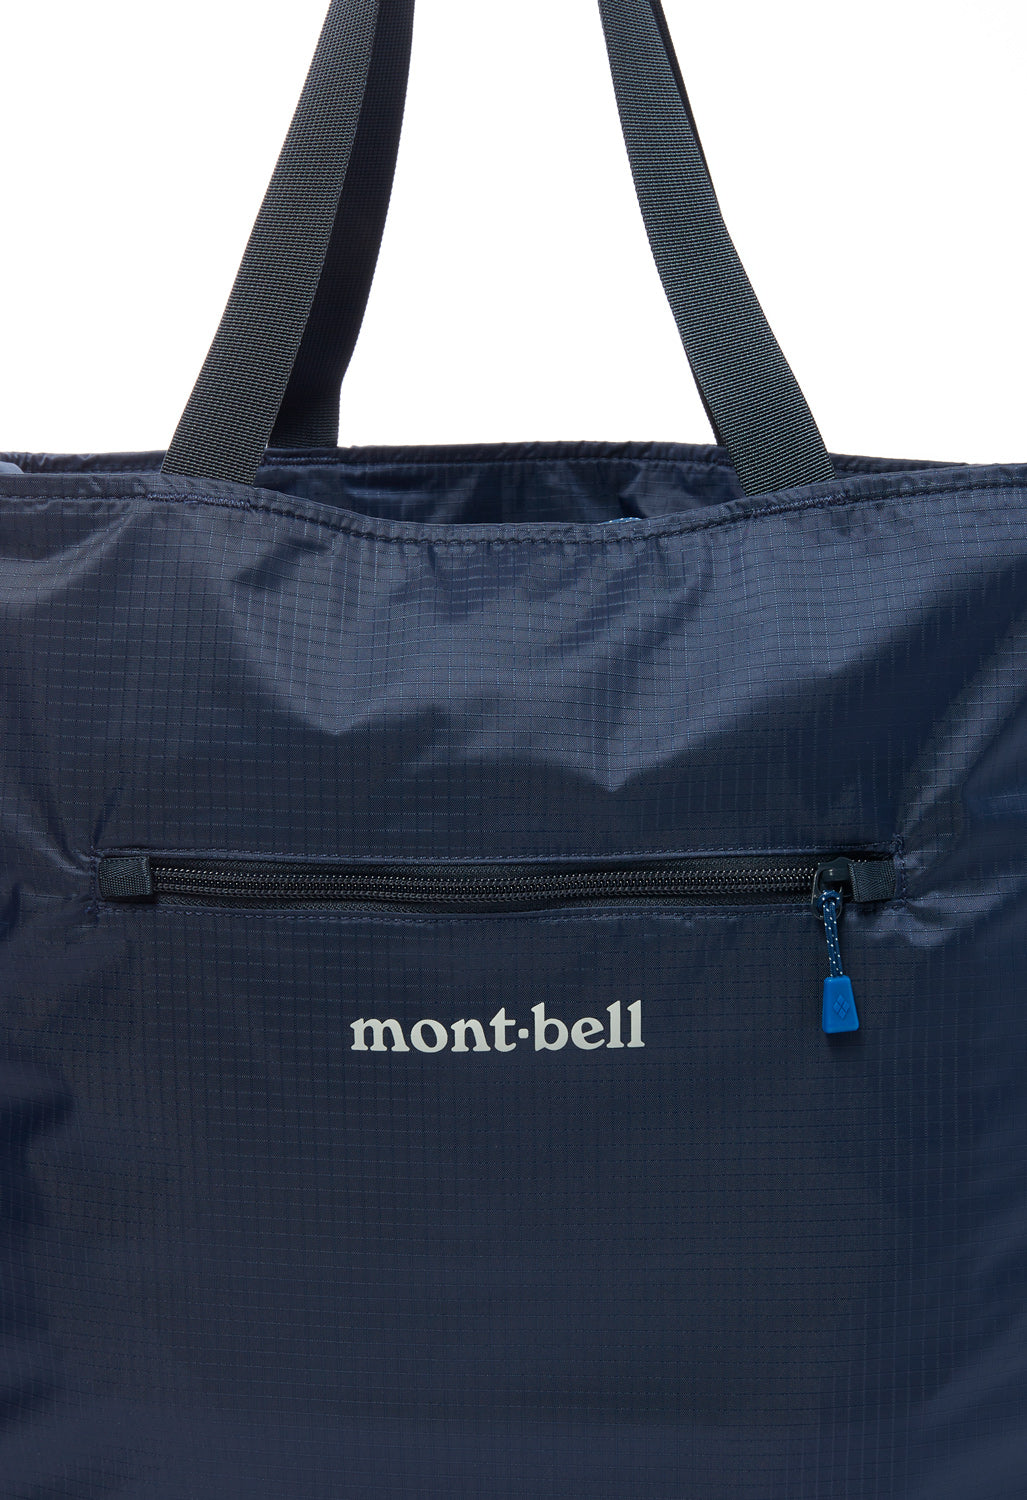 Montbell Pocketable Light Tote Large - Navy